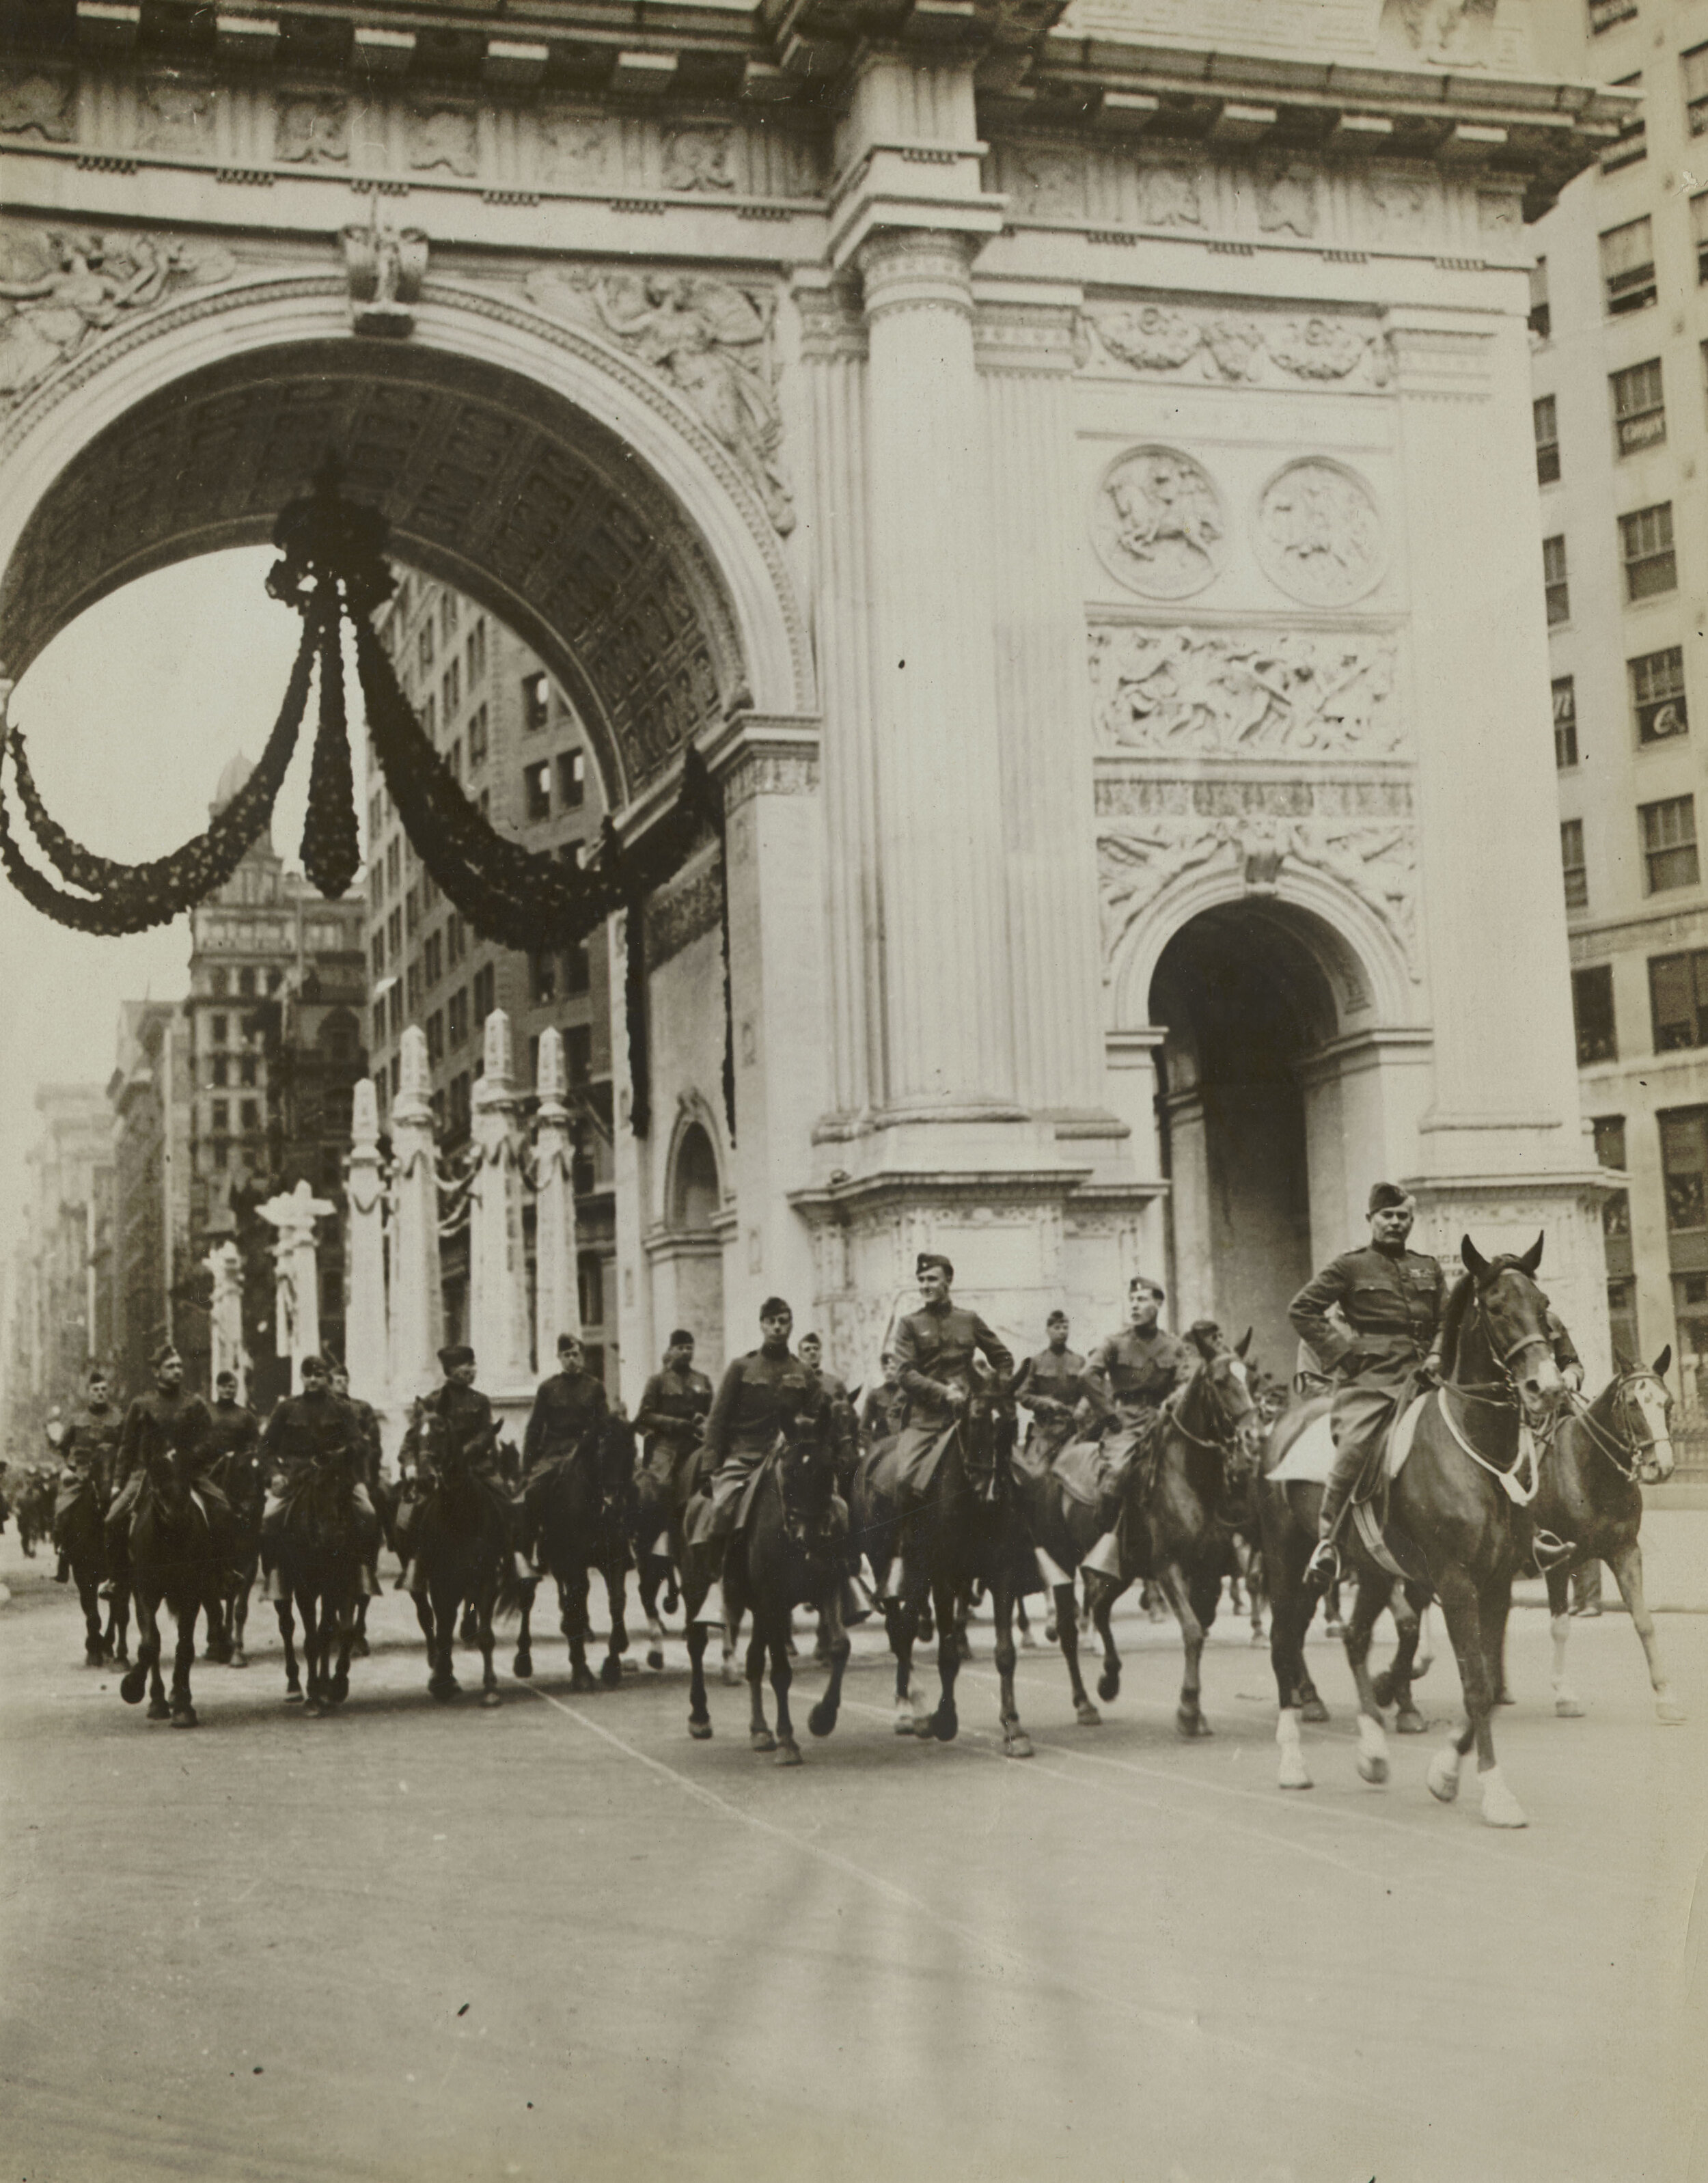 When Johnny Came Marching Home to Cheers — NYC Department of Records and Information Services image